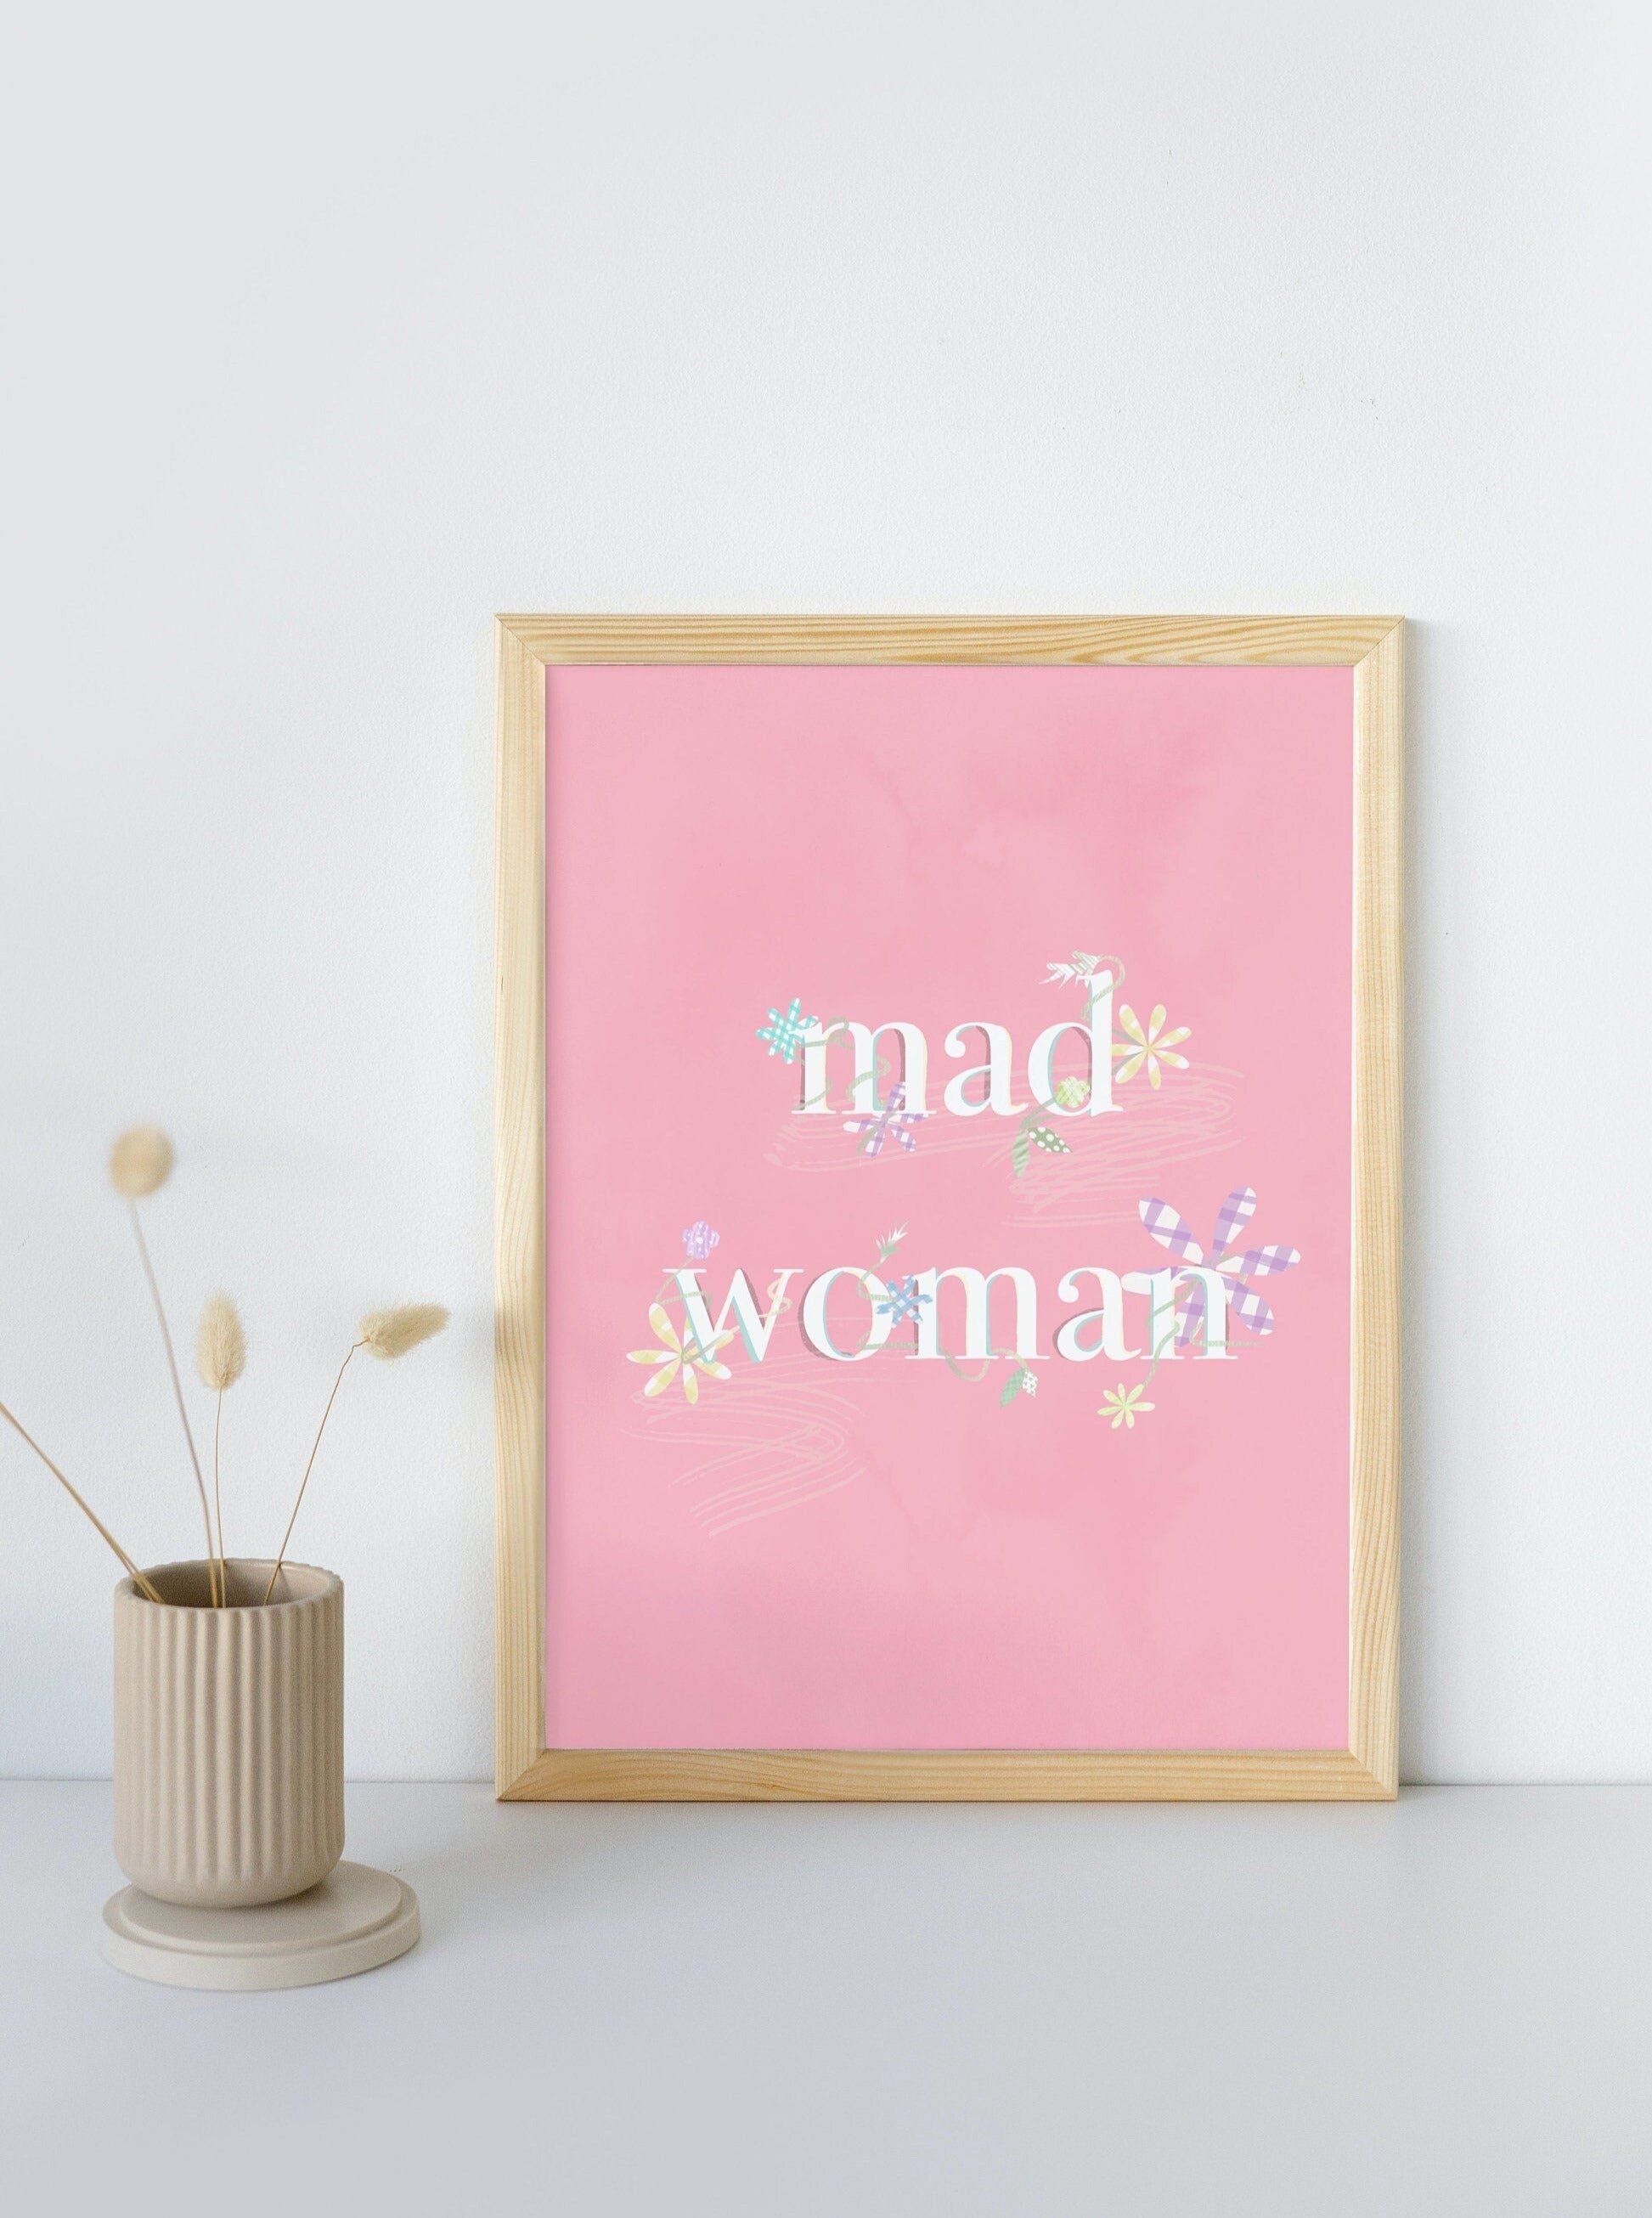 MAD WOMAN PRINT, vintage style taylor swift quote wall decor, cottage core style, gingham bedroom print in the U.K. minimal wall decor